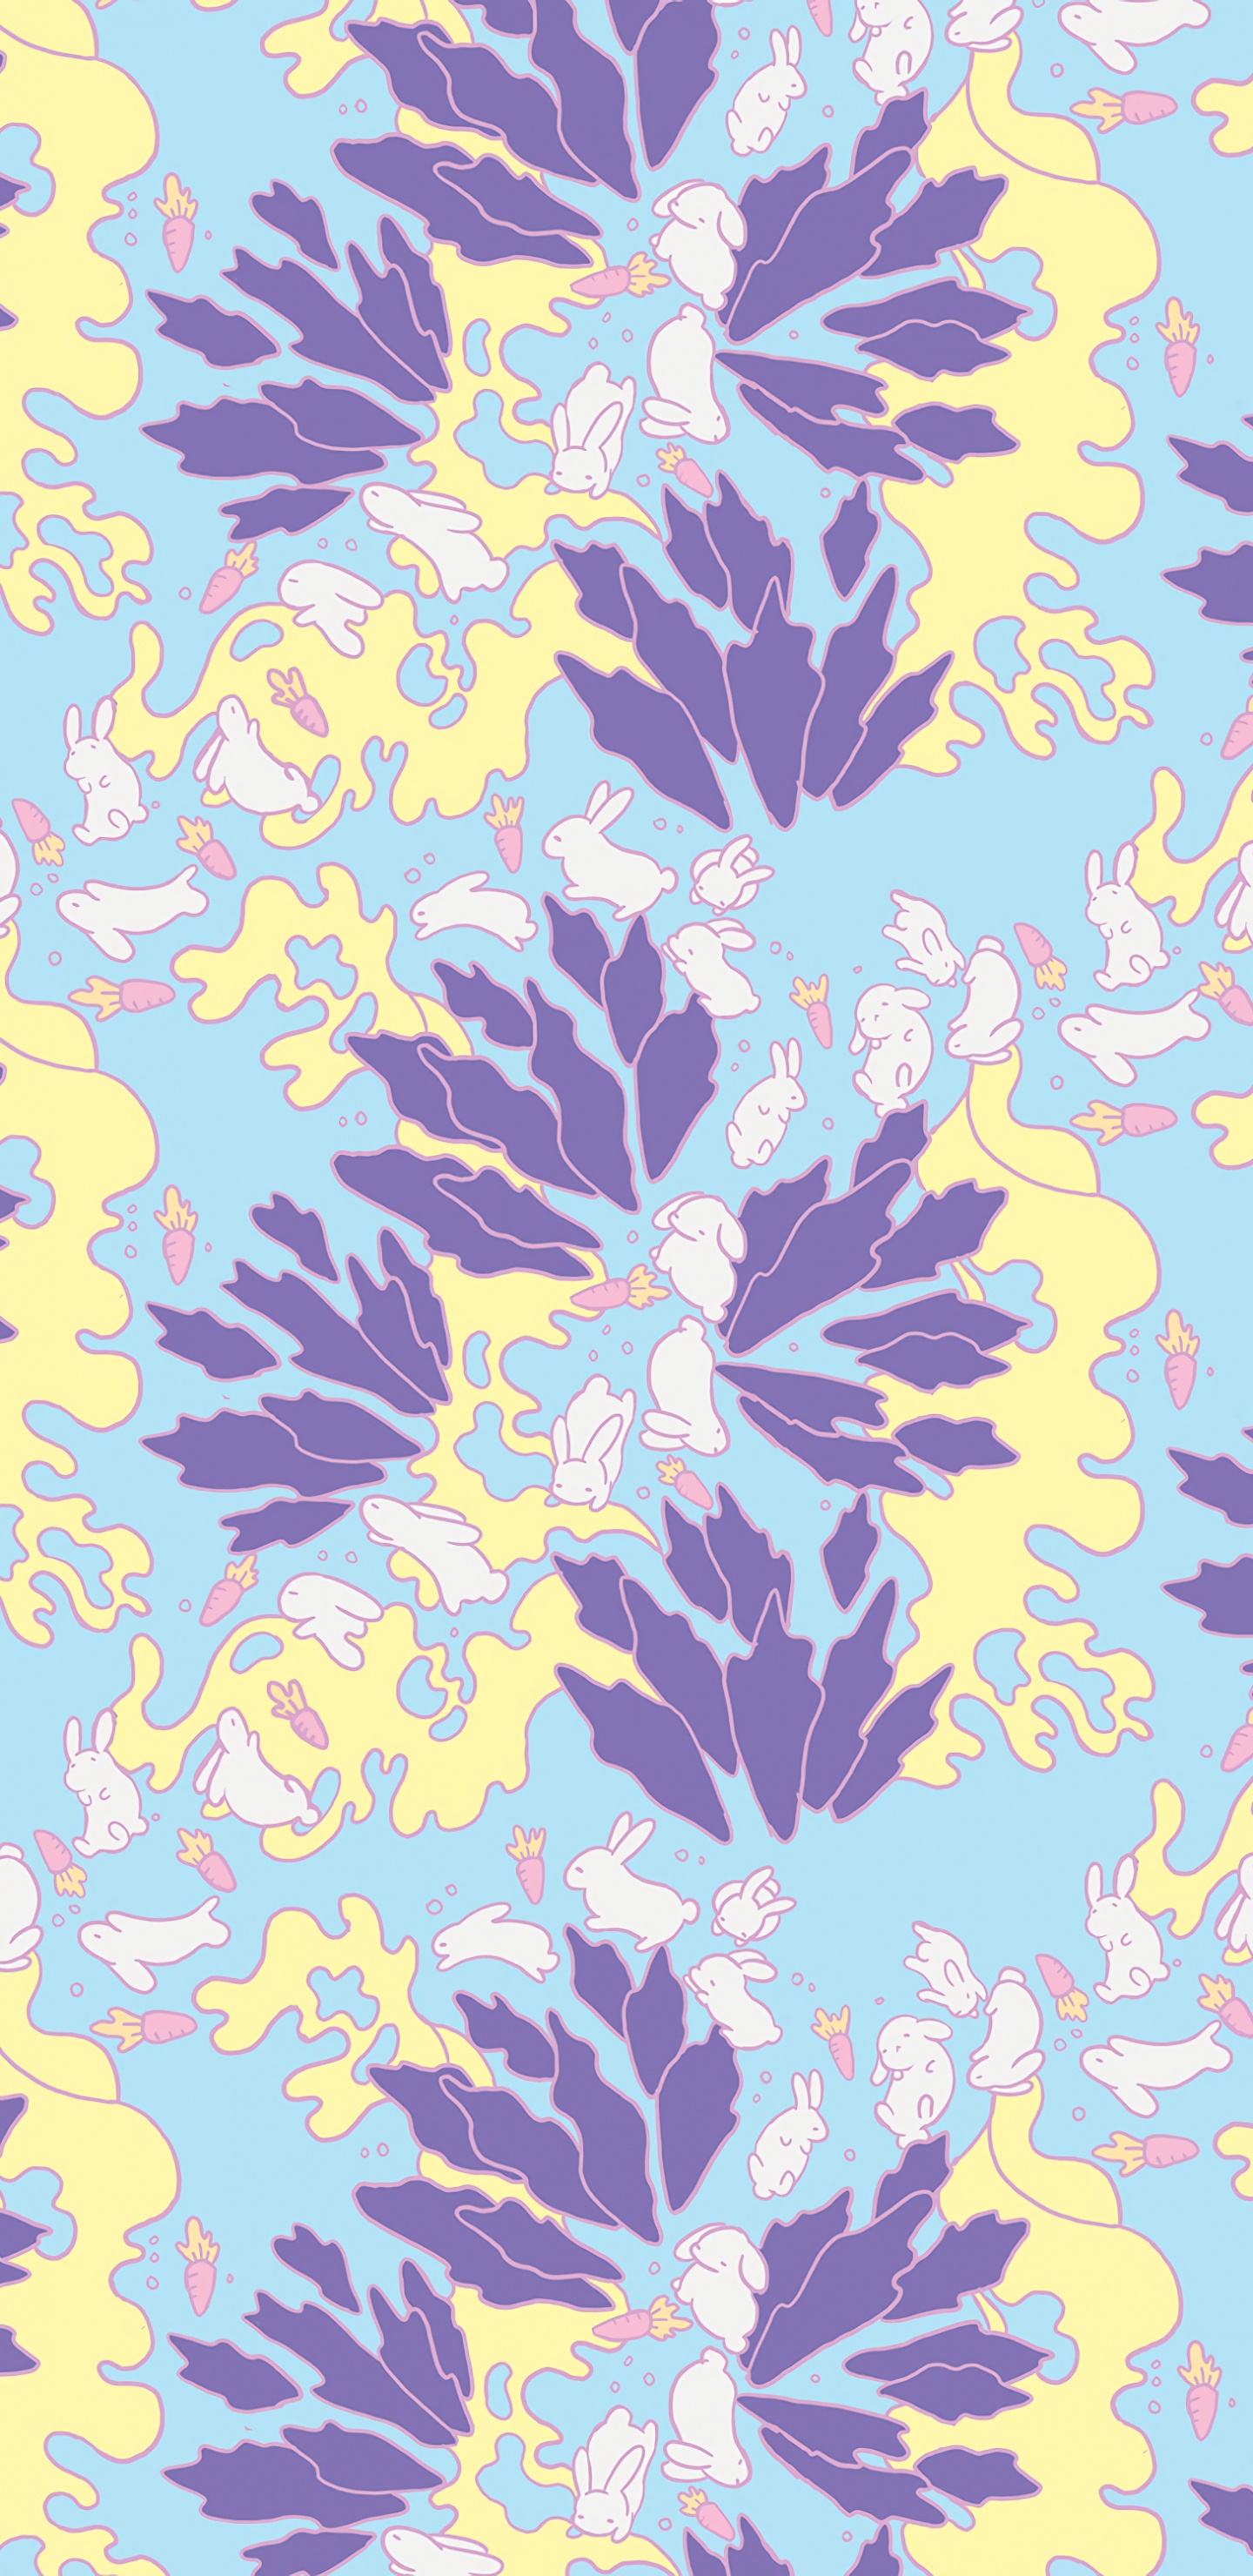 Blue Yellow and Black Floral Textile. Wallpaper in 1440x2960 Resolution